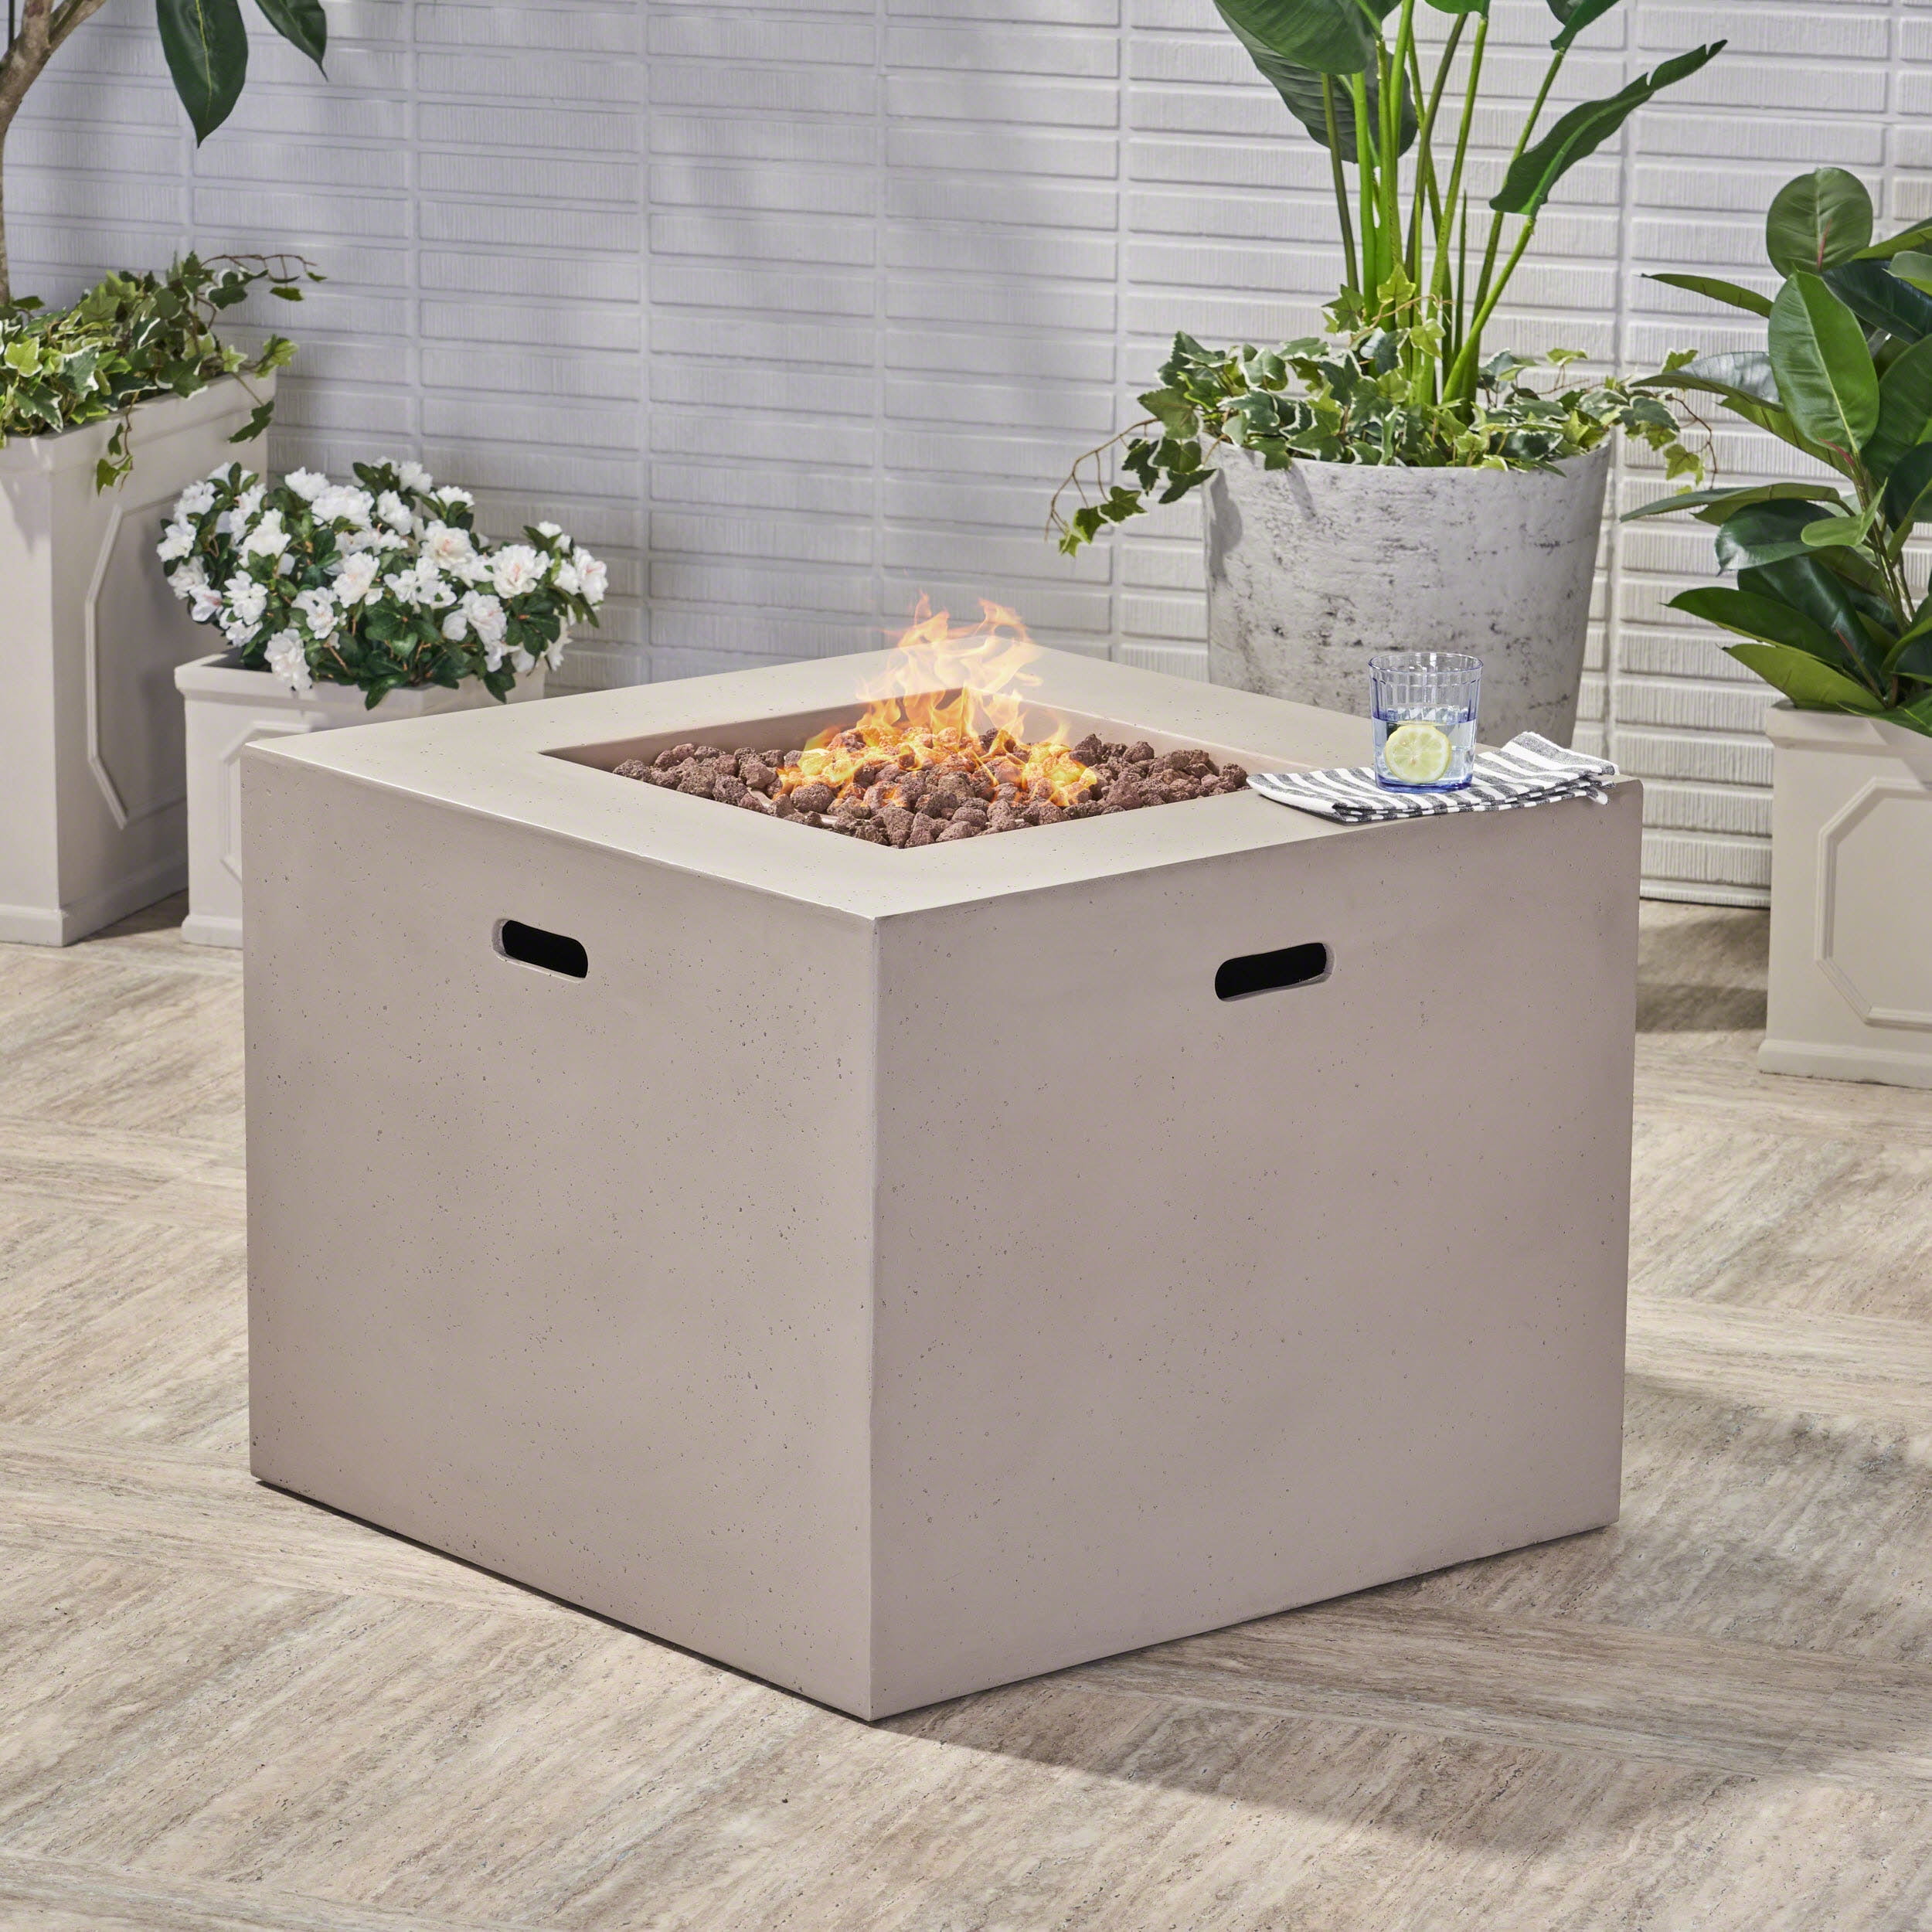 Leo Outdoor 31 Square Light Weight, Gas Concrete Fire Pit